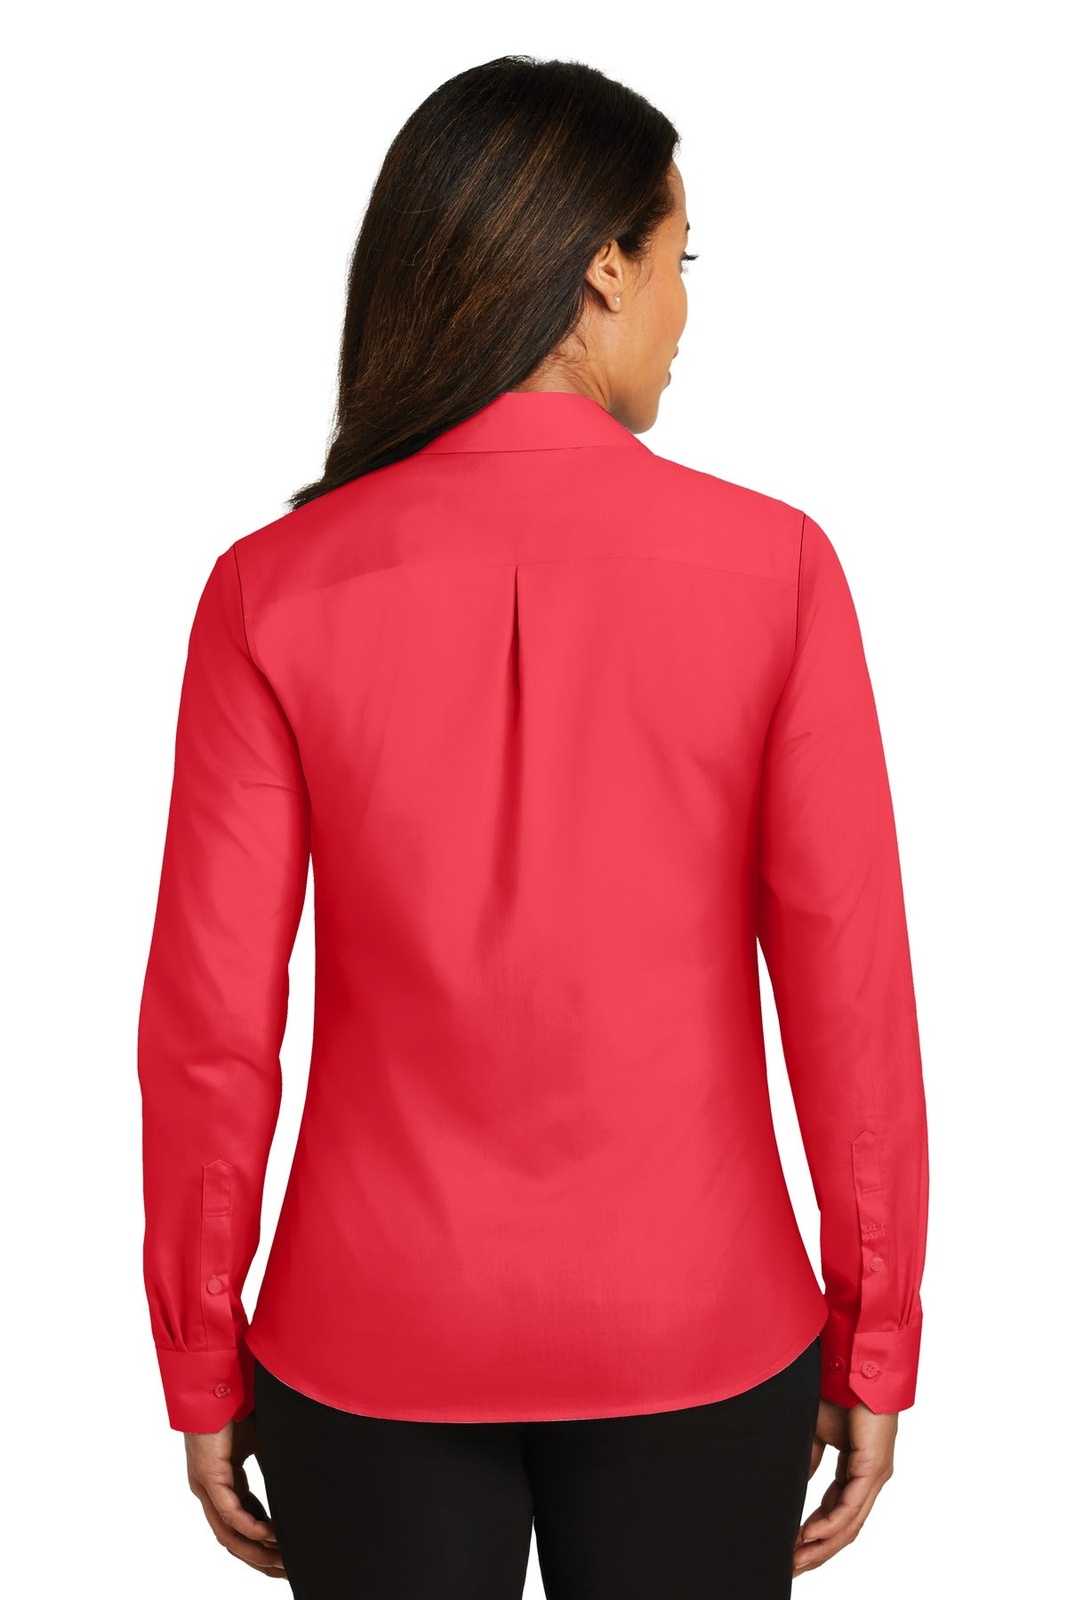 Red House RH79 Ladies Non-Iron Twill Shirt - Dragonfruit Pink - HIT a Double - 2